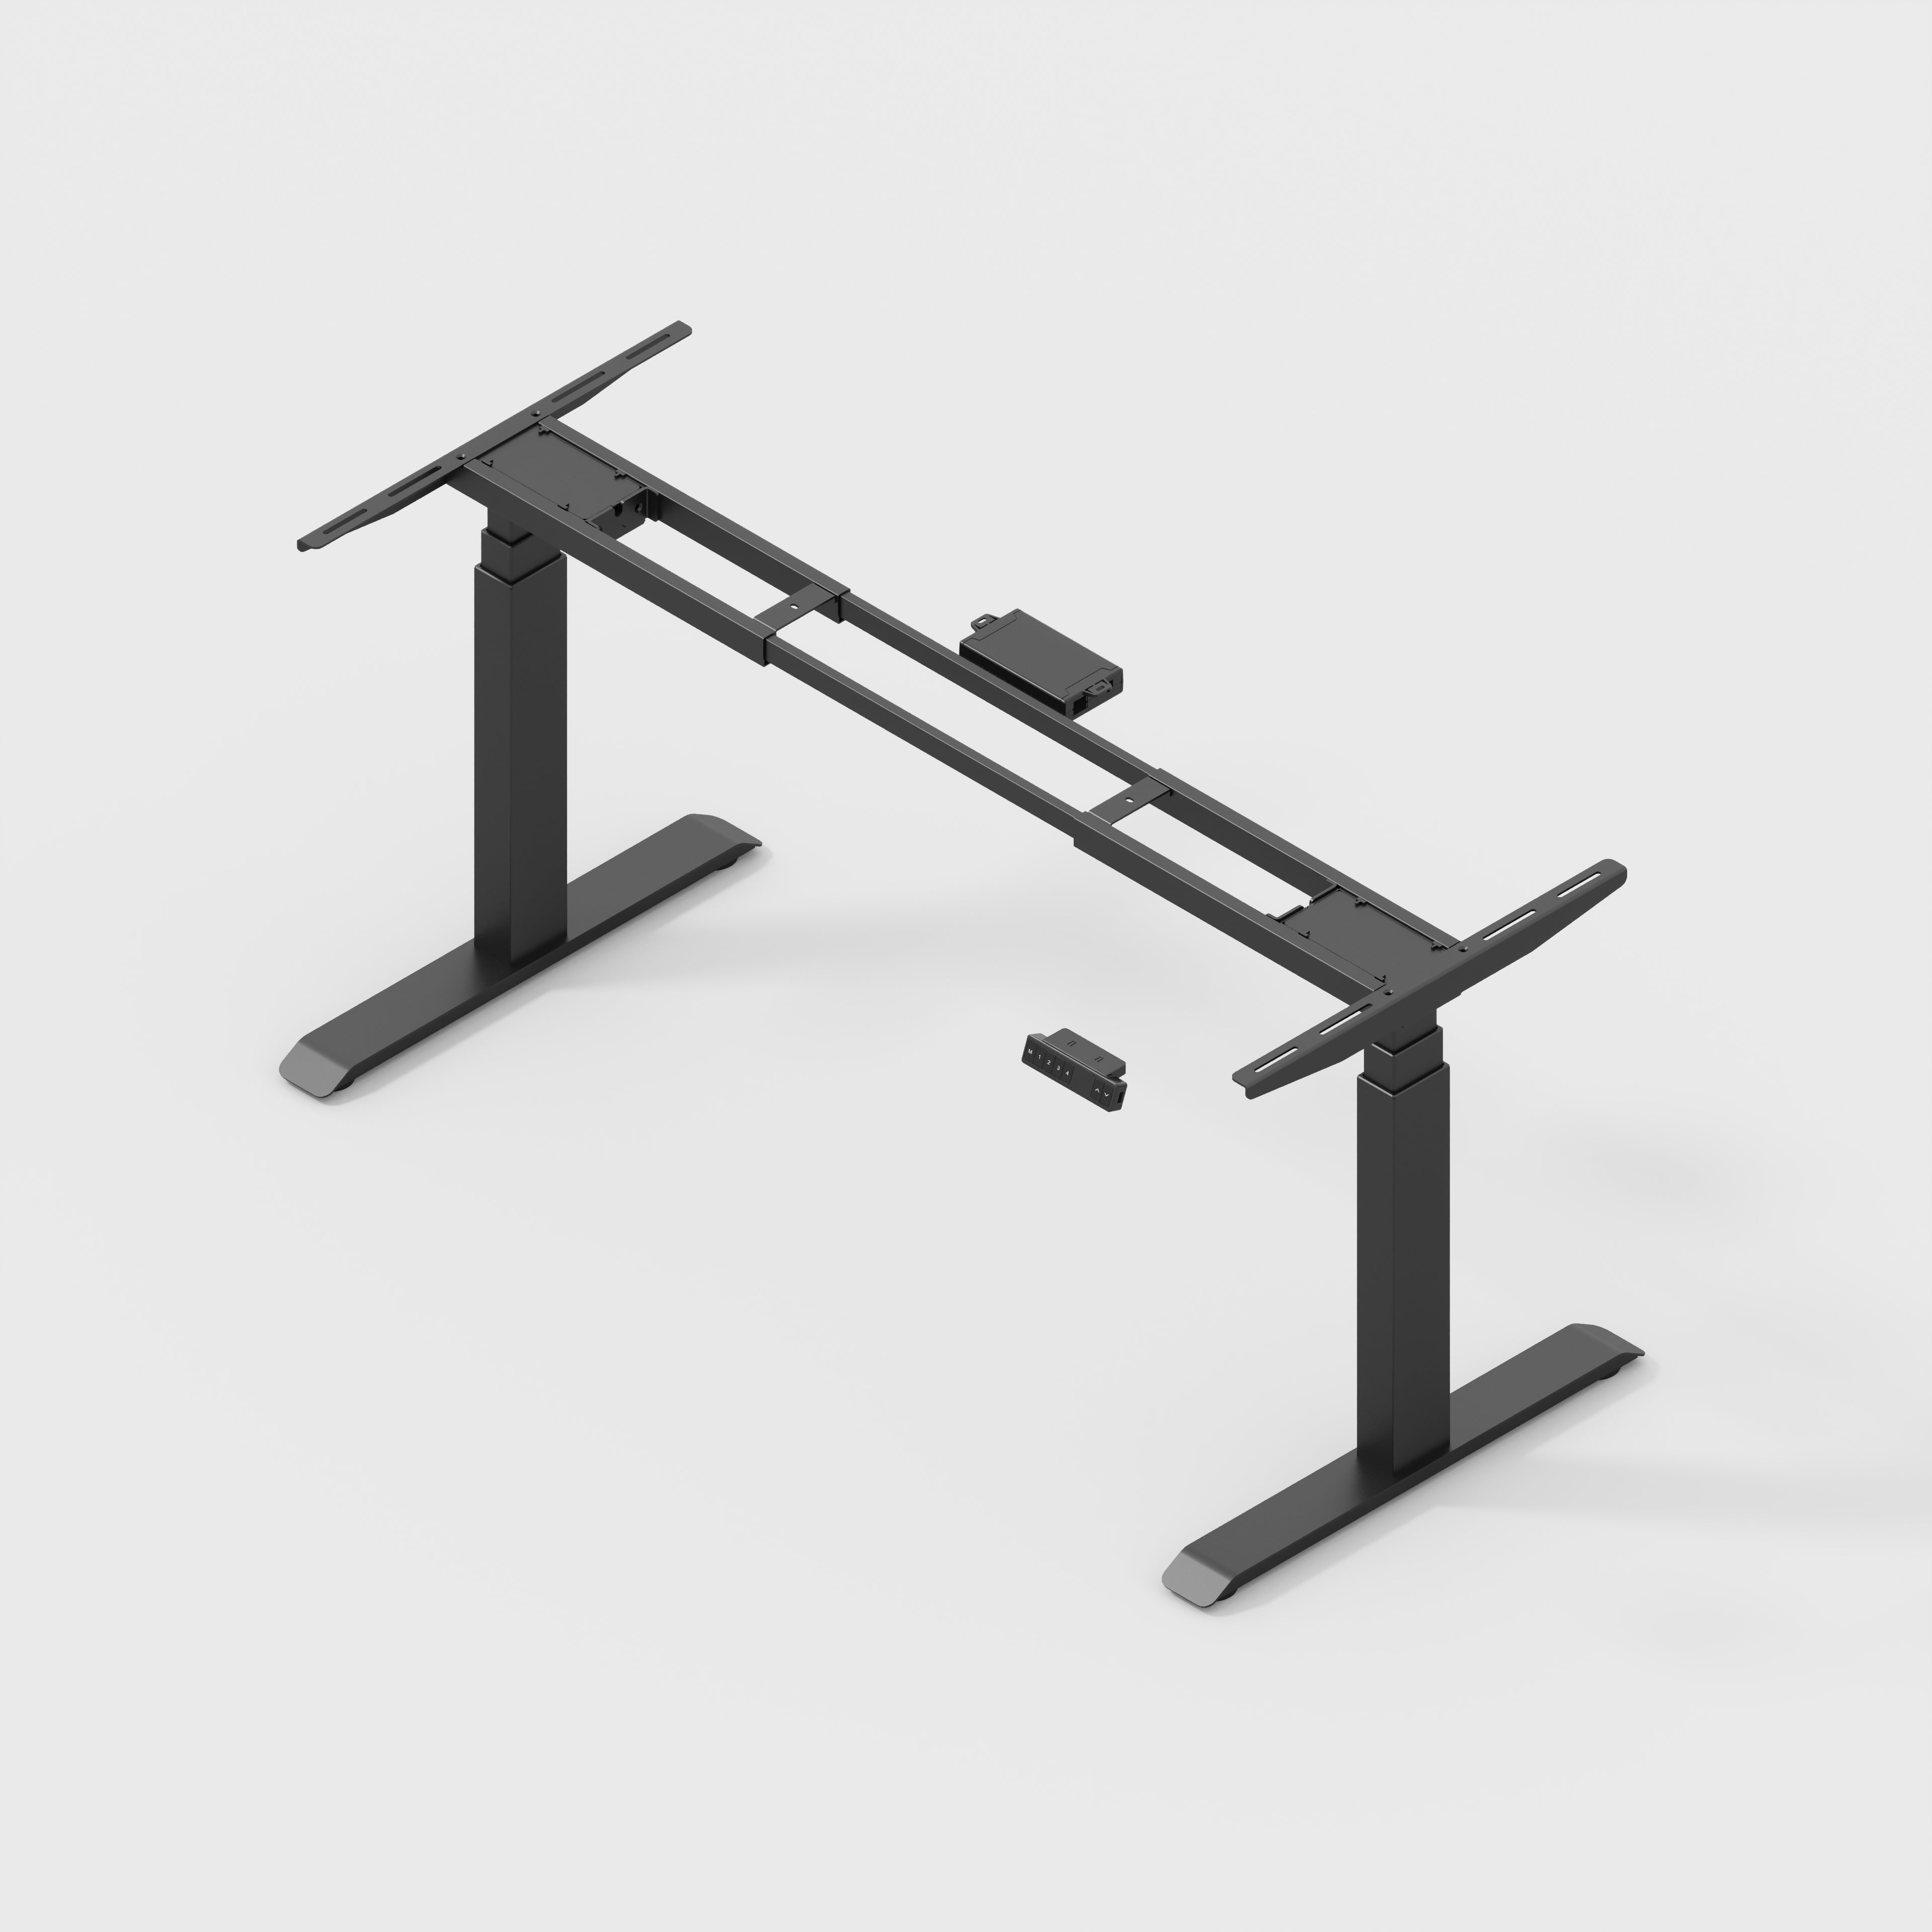 Desk/Table Legs - Sit-Stand Frame